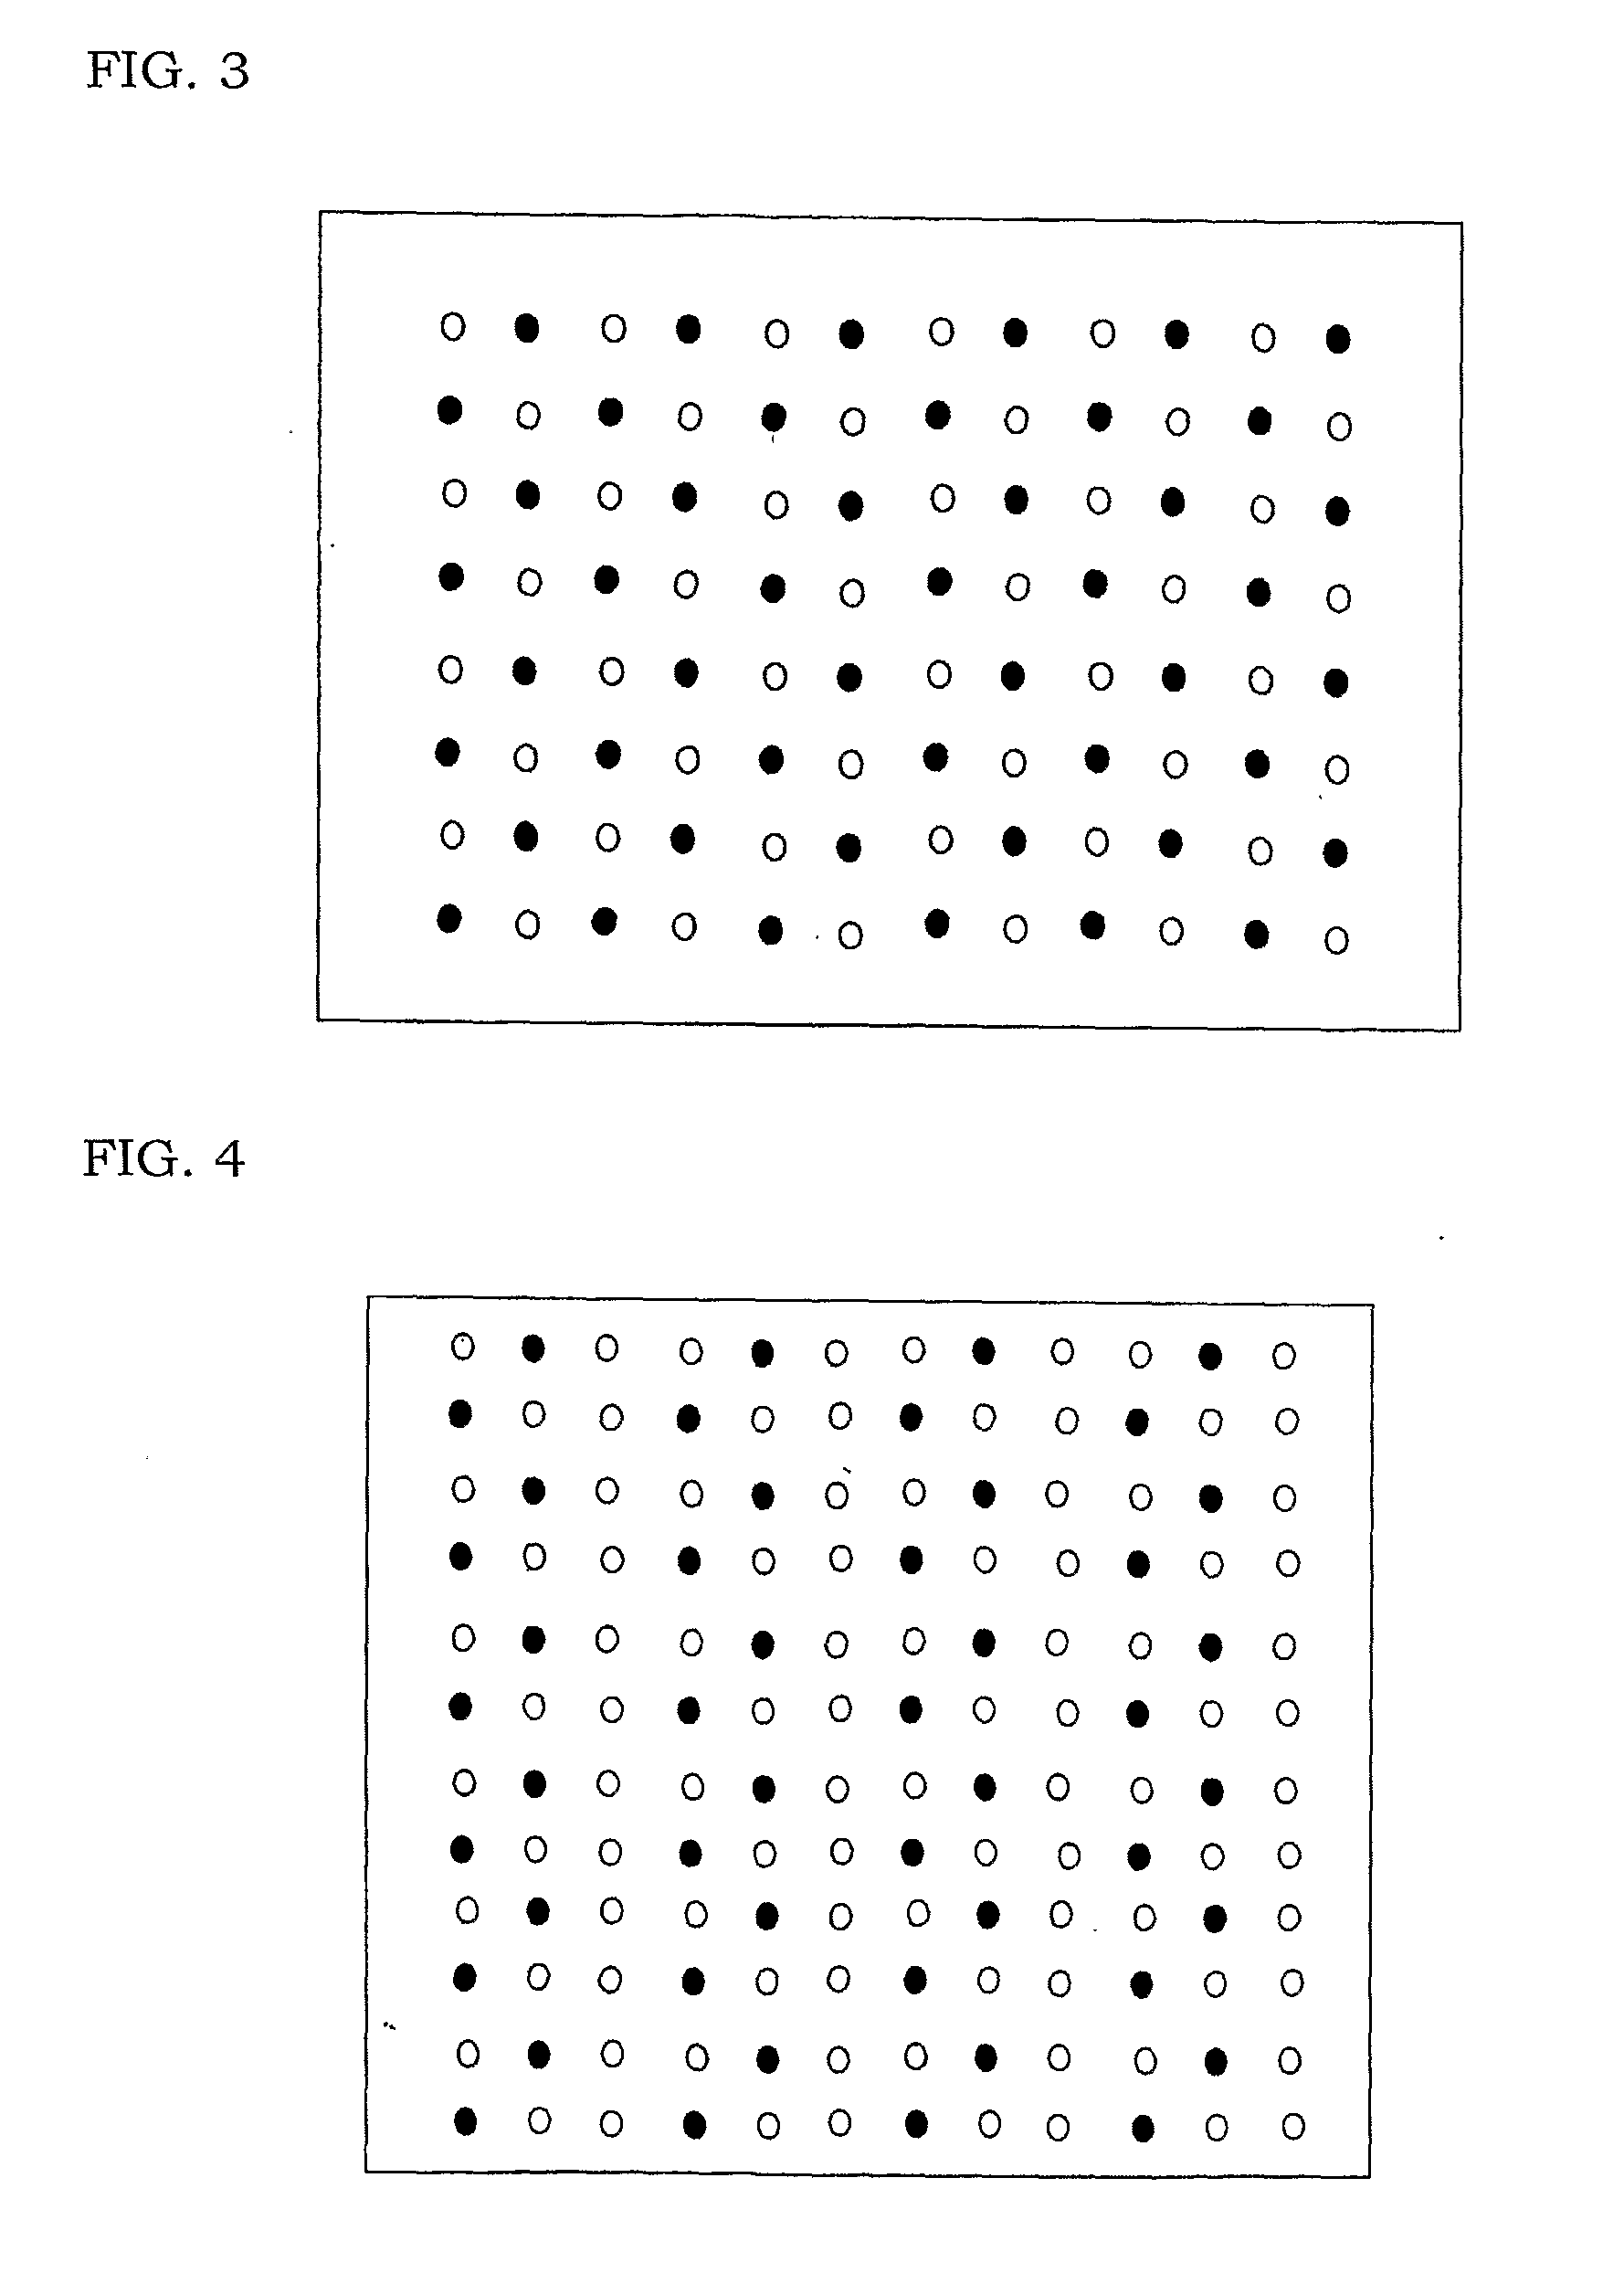 Conjugate Electrospinning Devices, Conjugate Nonwoven and Filament Comprising Nanofibers Prepared by Using the Same